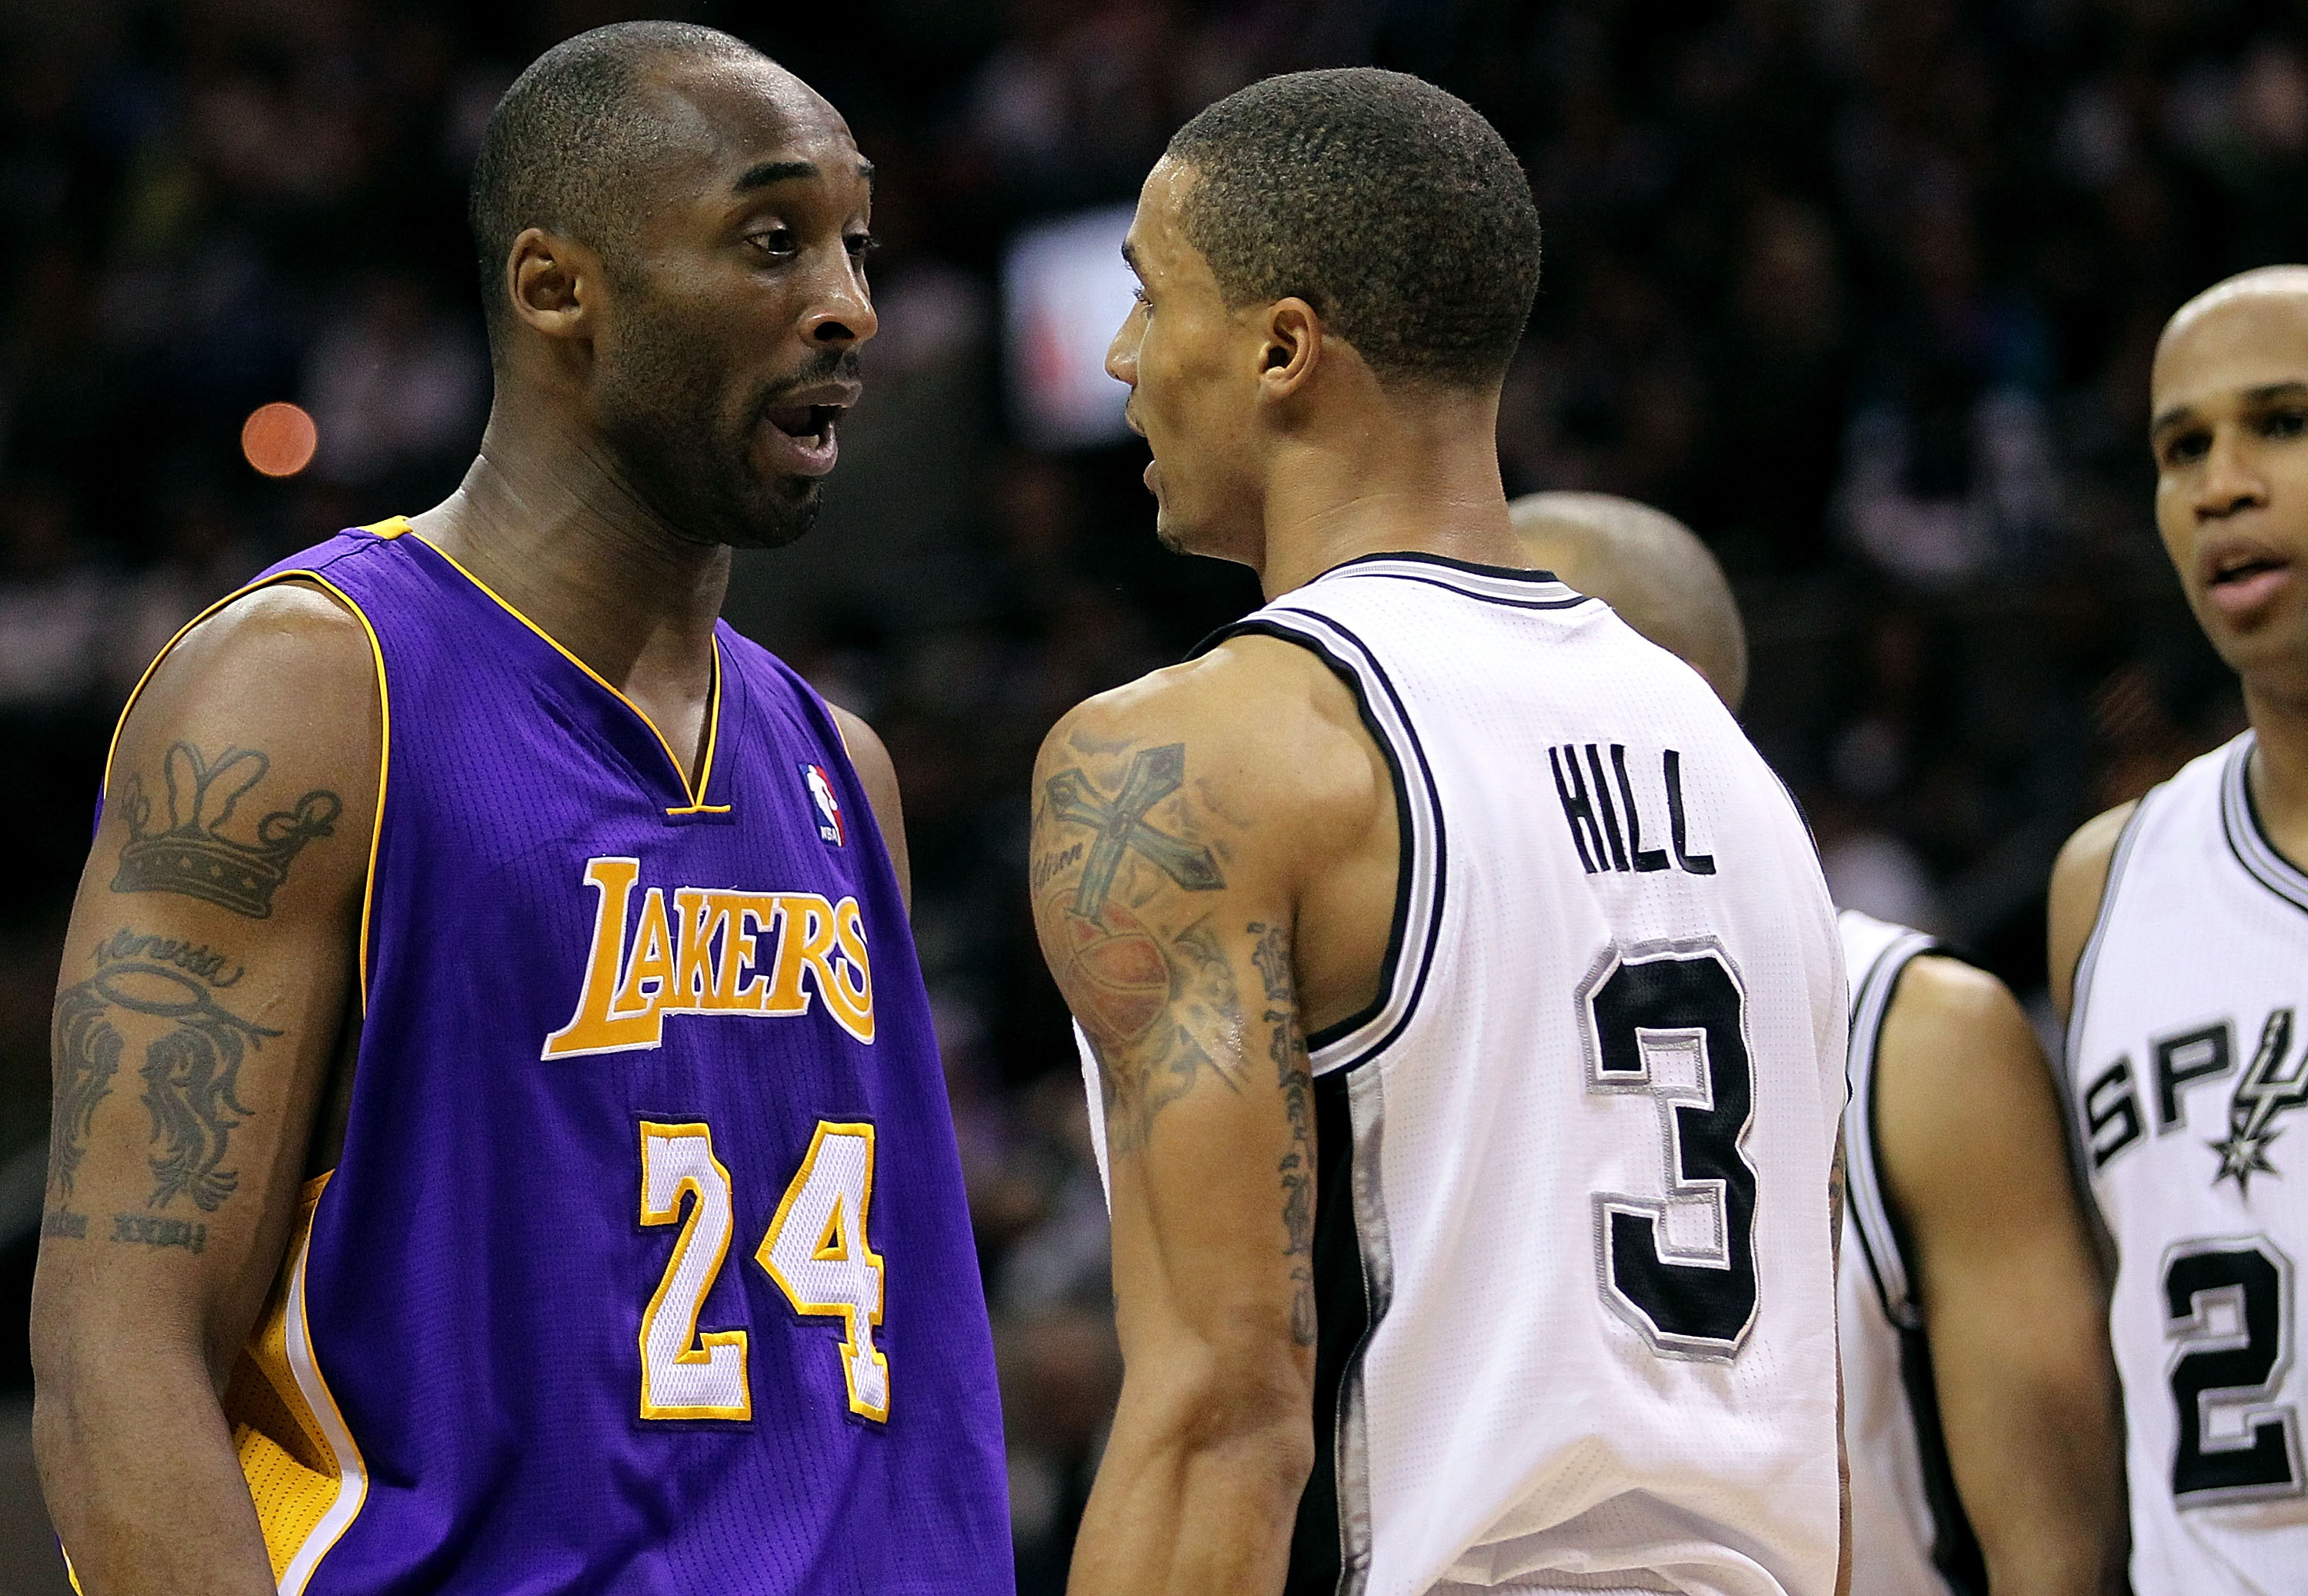 SAN ANTONIO, TX - DECEMBER 28:  Guard Kobe Bryant #24 of the Los Angeles Lakers and George Hill #3 of the San Antonio Spurs confront one another in the second quarter at AT&T Center on December 28, 2010 in San Antonio, Texas.  NOTE TO USER: User expressly